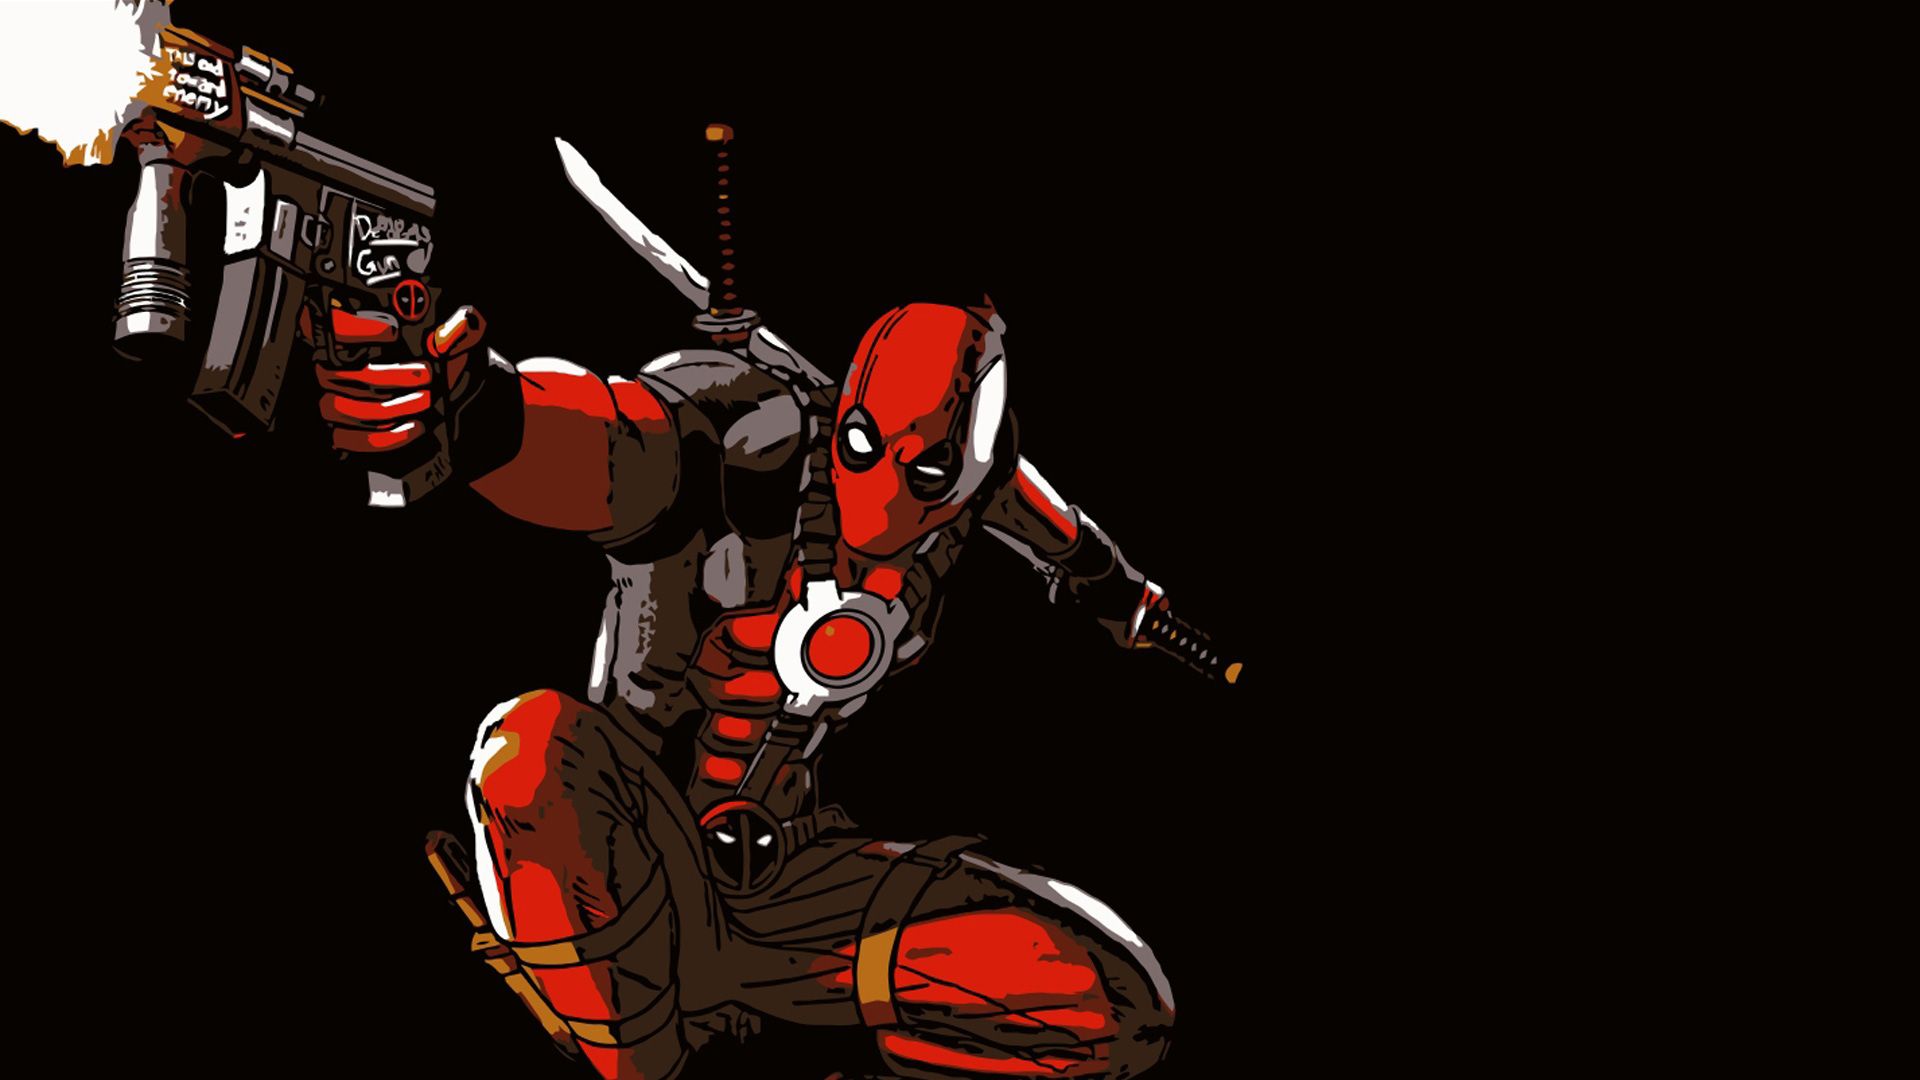 Wallpaper from Deadpool: The Video Game